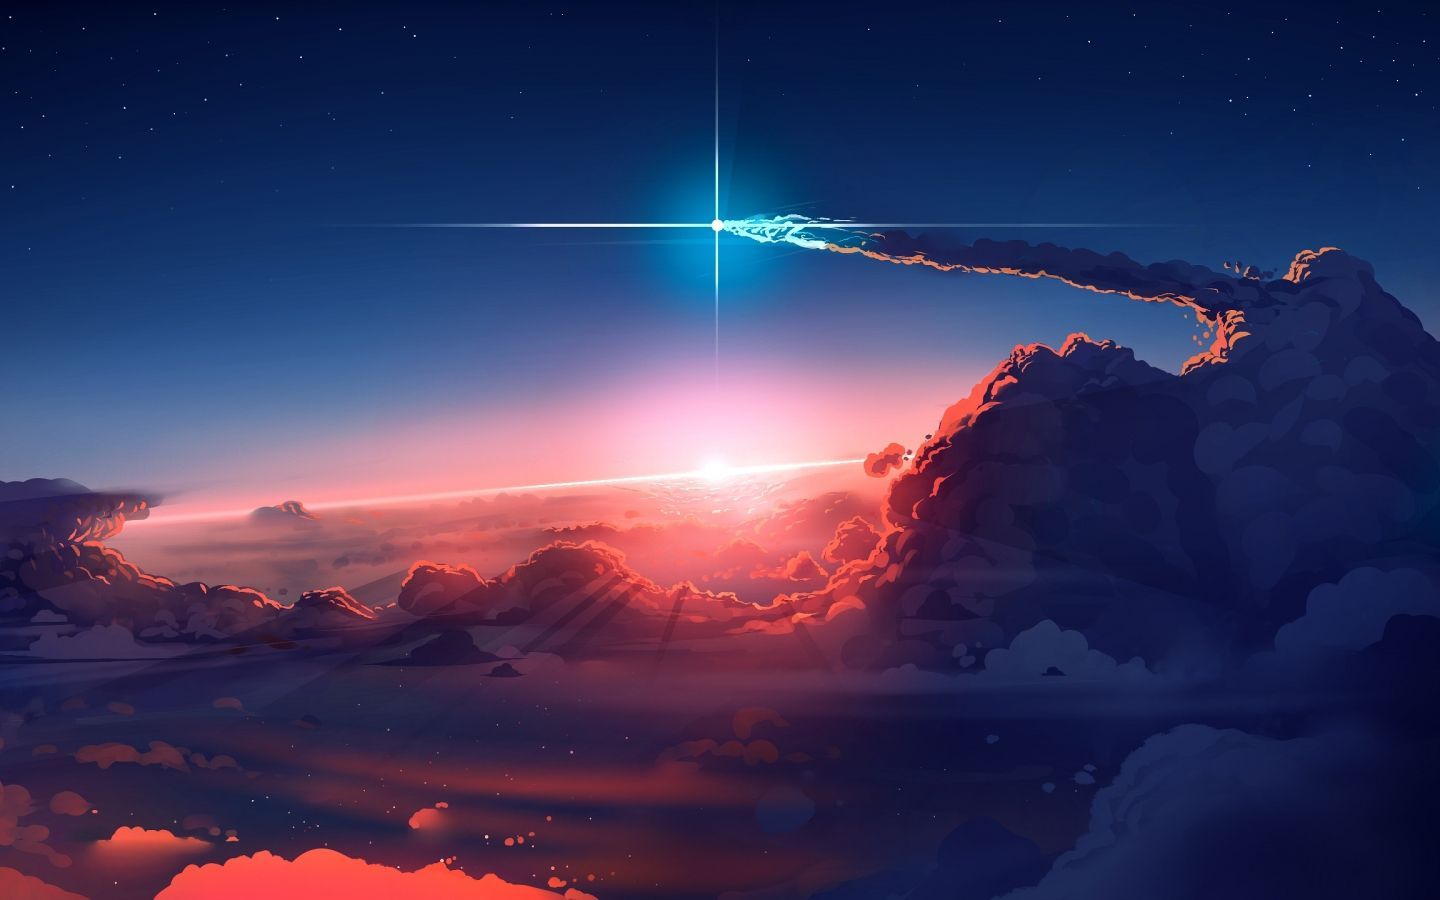 Download wallpaper 1440x900 clouds, sky, anime, 1440x900 widescreen 16:10 HD background, 24784